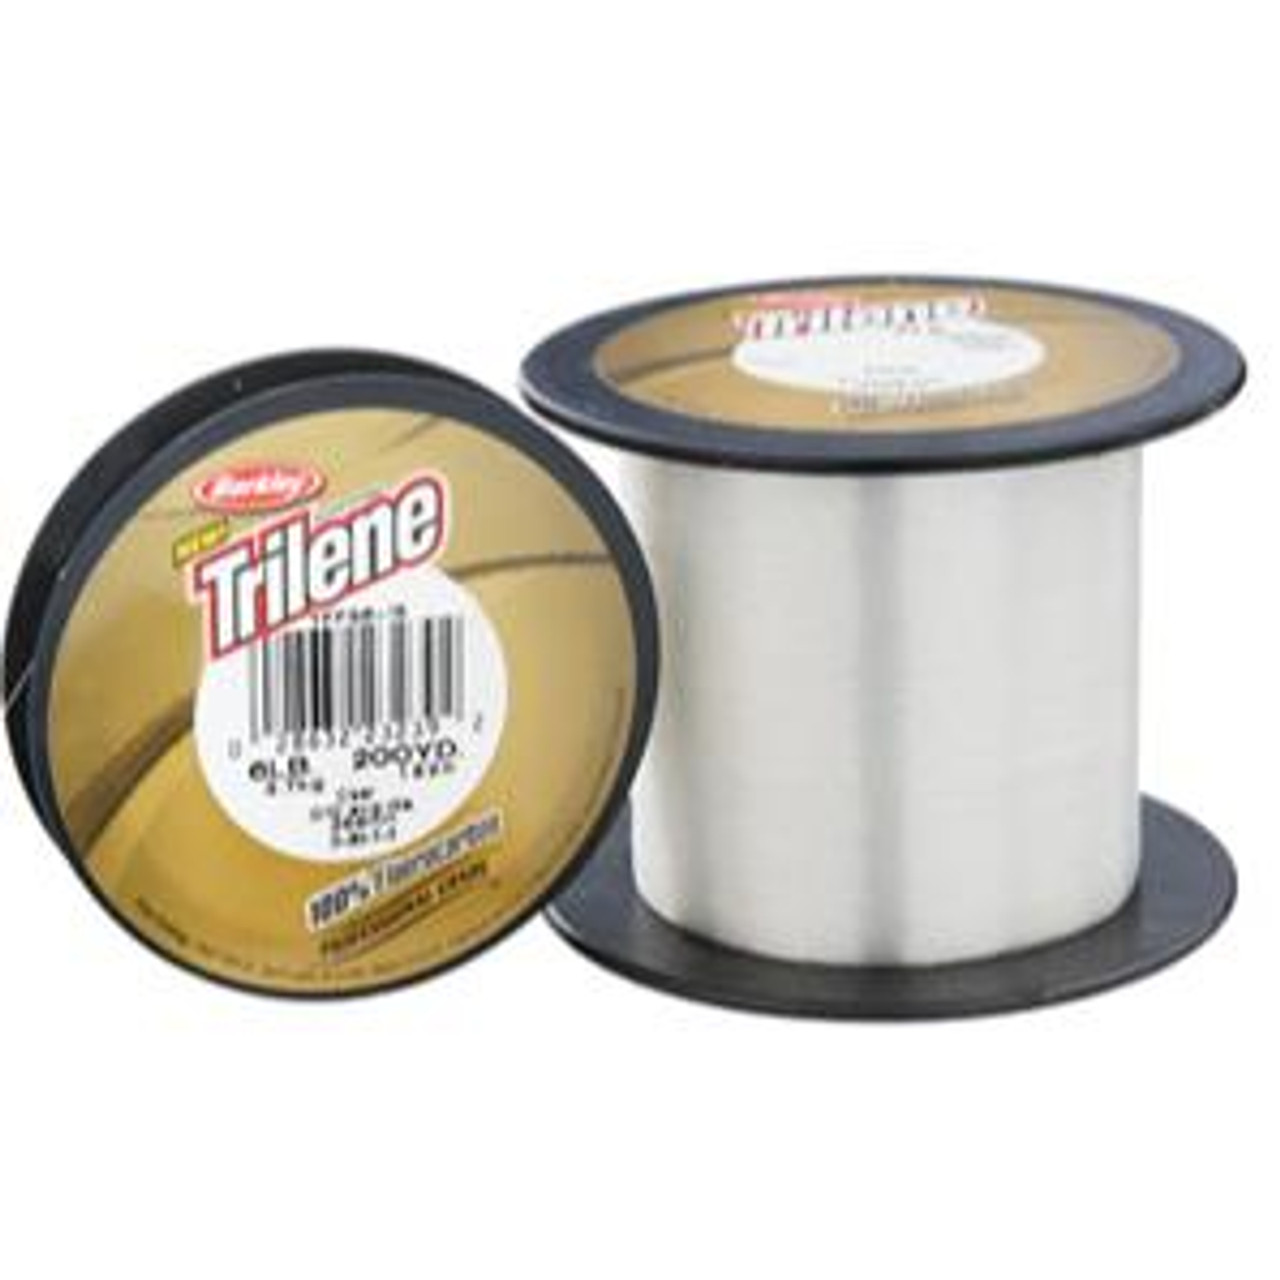 https://cdn11.bigcommerce.com/s-70mih4s/images/stencil/1280x1280/products/3507/28836/Berkley-Trilene-100-Fluorocarbon-Clear-10lb-2000yd-02863223282_image1__48105.1445896403.jpg?c=2